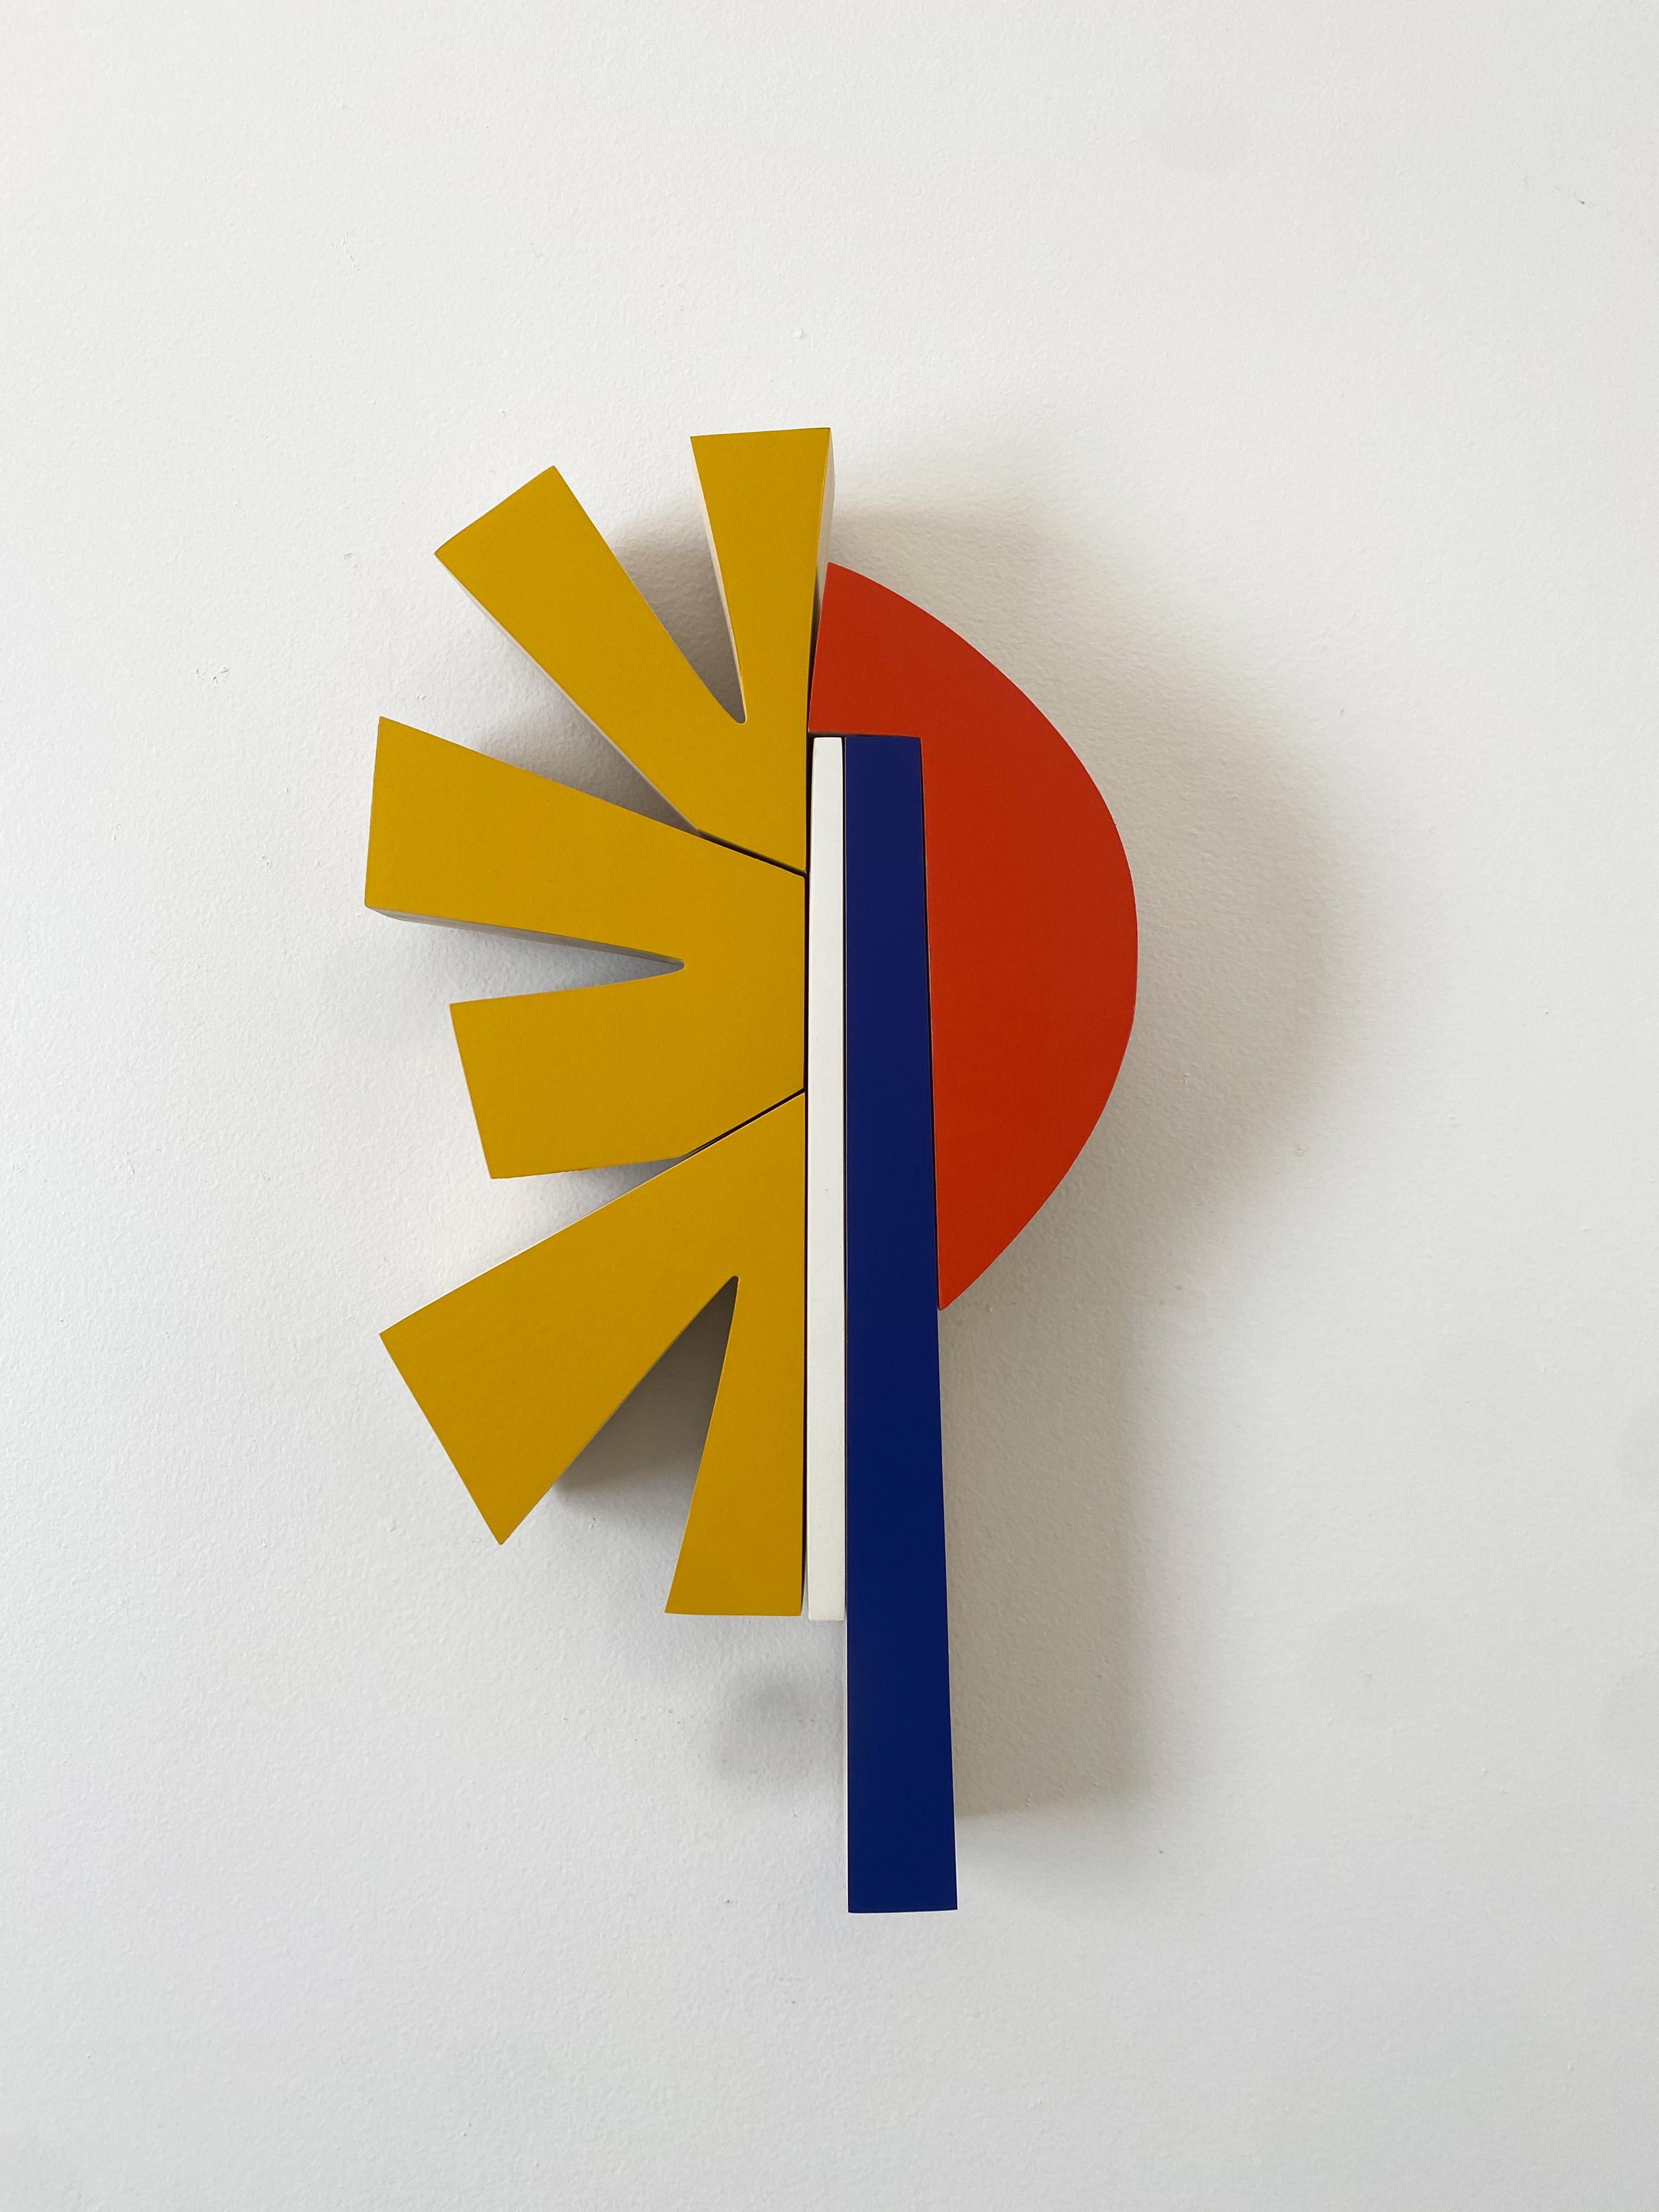 Artwork made with spray acrylic on solid poplar matte finish

Small Pop series are minimalist driven, wood wall sculptures that are small and blocky and feature bright saturated colors. The pieces was inspired by my love for simple bold colors and